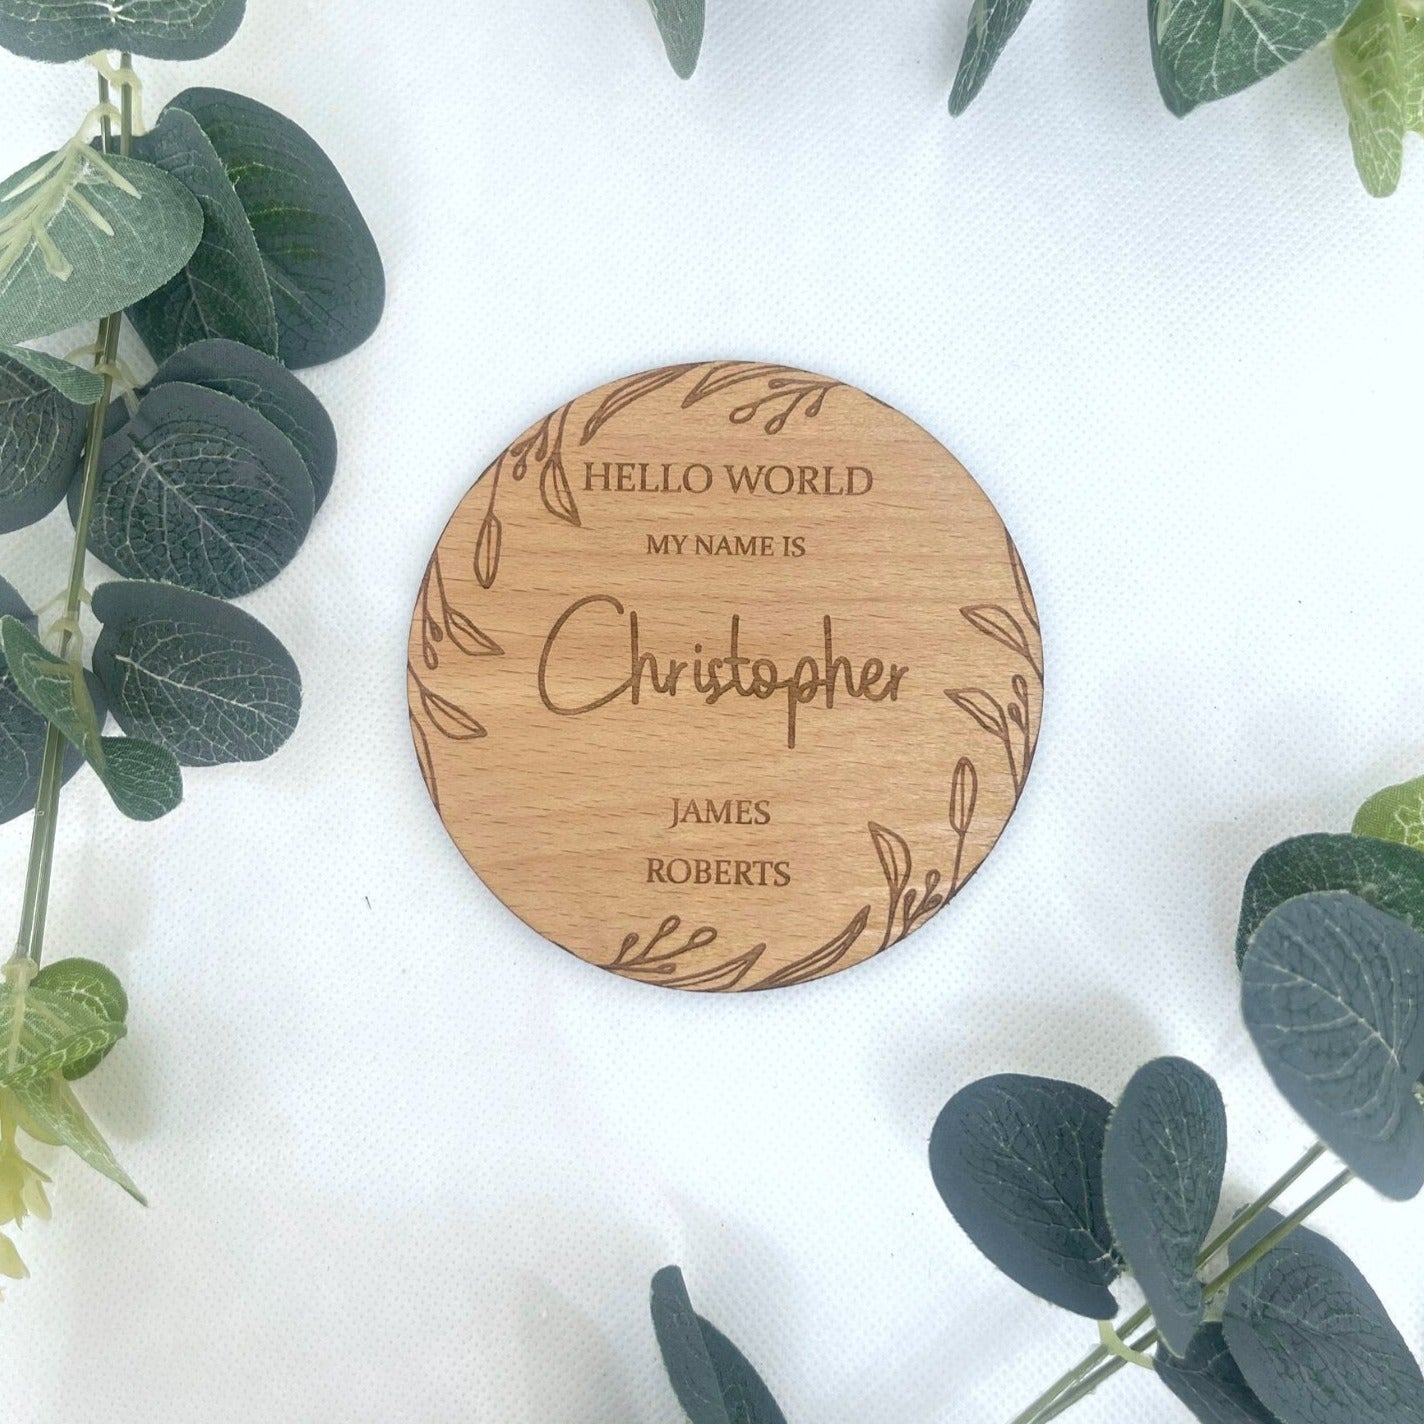 Celebrate new beginnings with our Customizable Baby Announcement Plaque – a thoughtful and heartfelt gift for the joyous occasion.